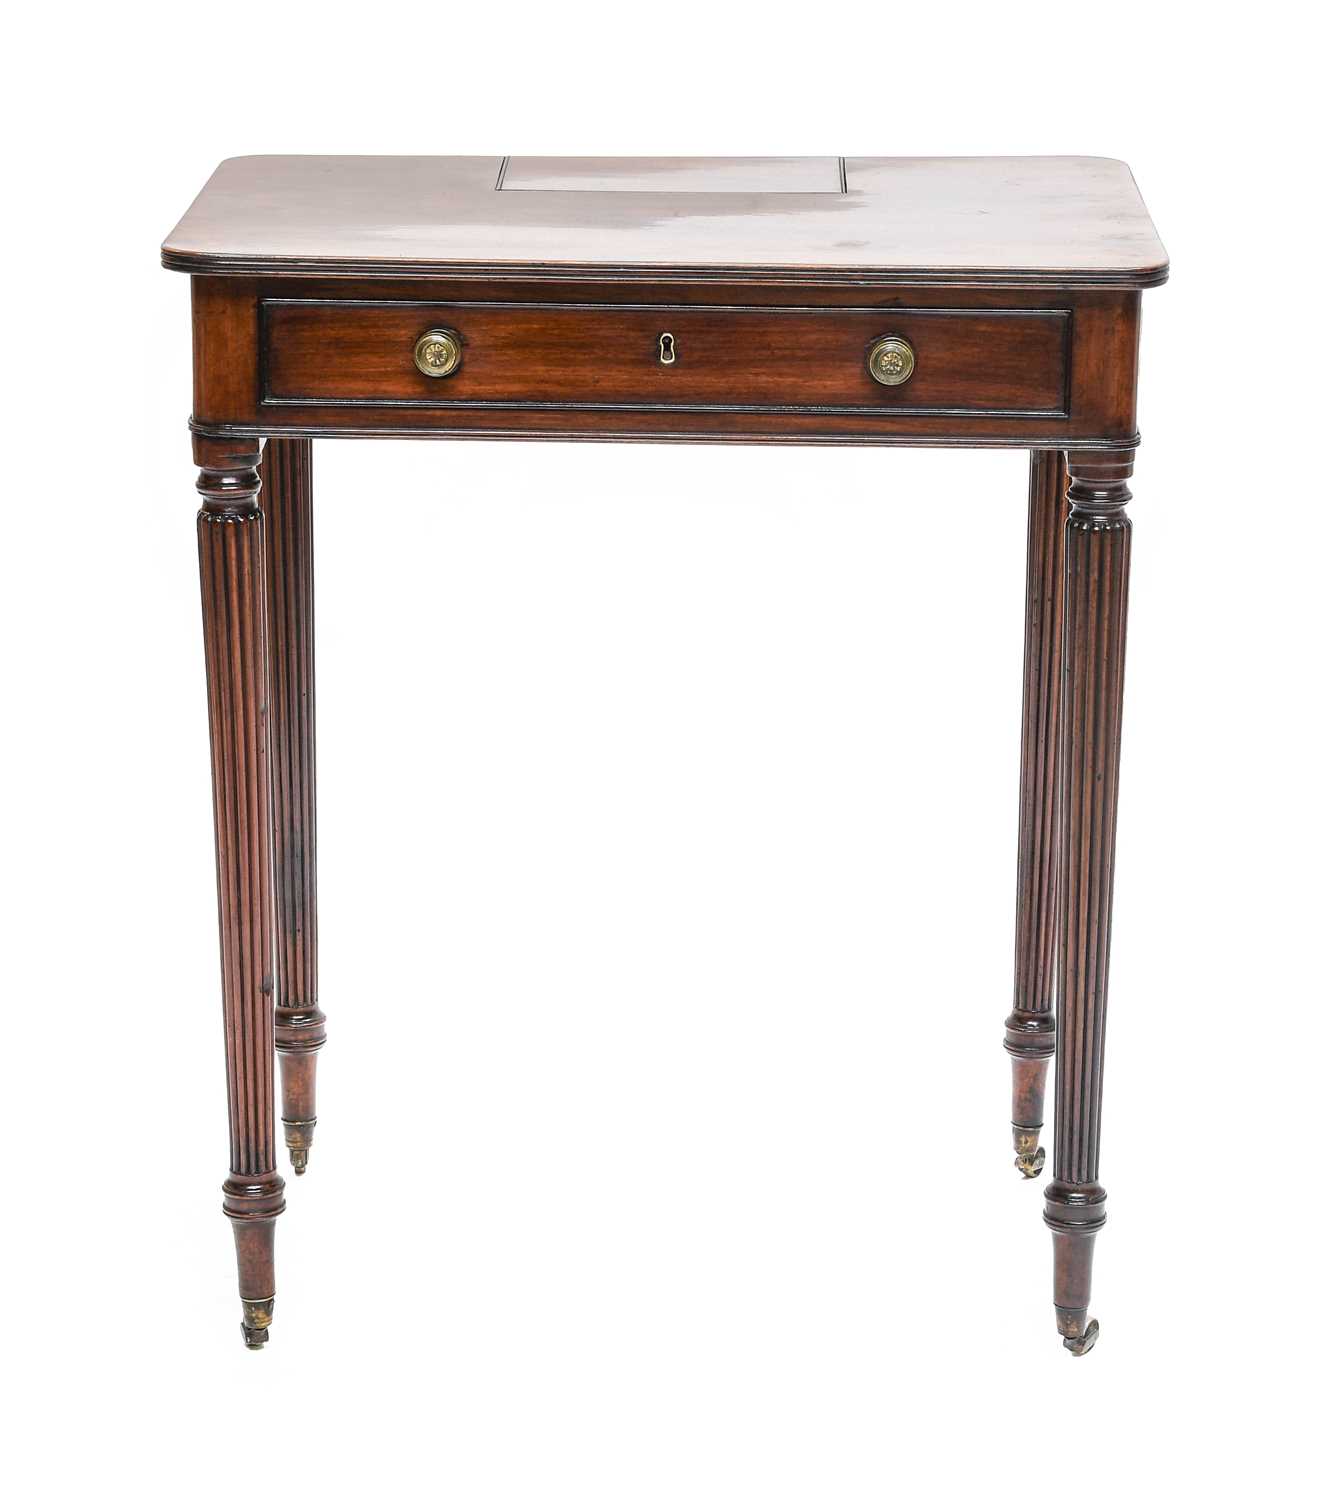 An Early 19th Century Mahogany Chamber Table, by Gillows of Lancaster, with pivotring lid to enclose